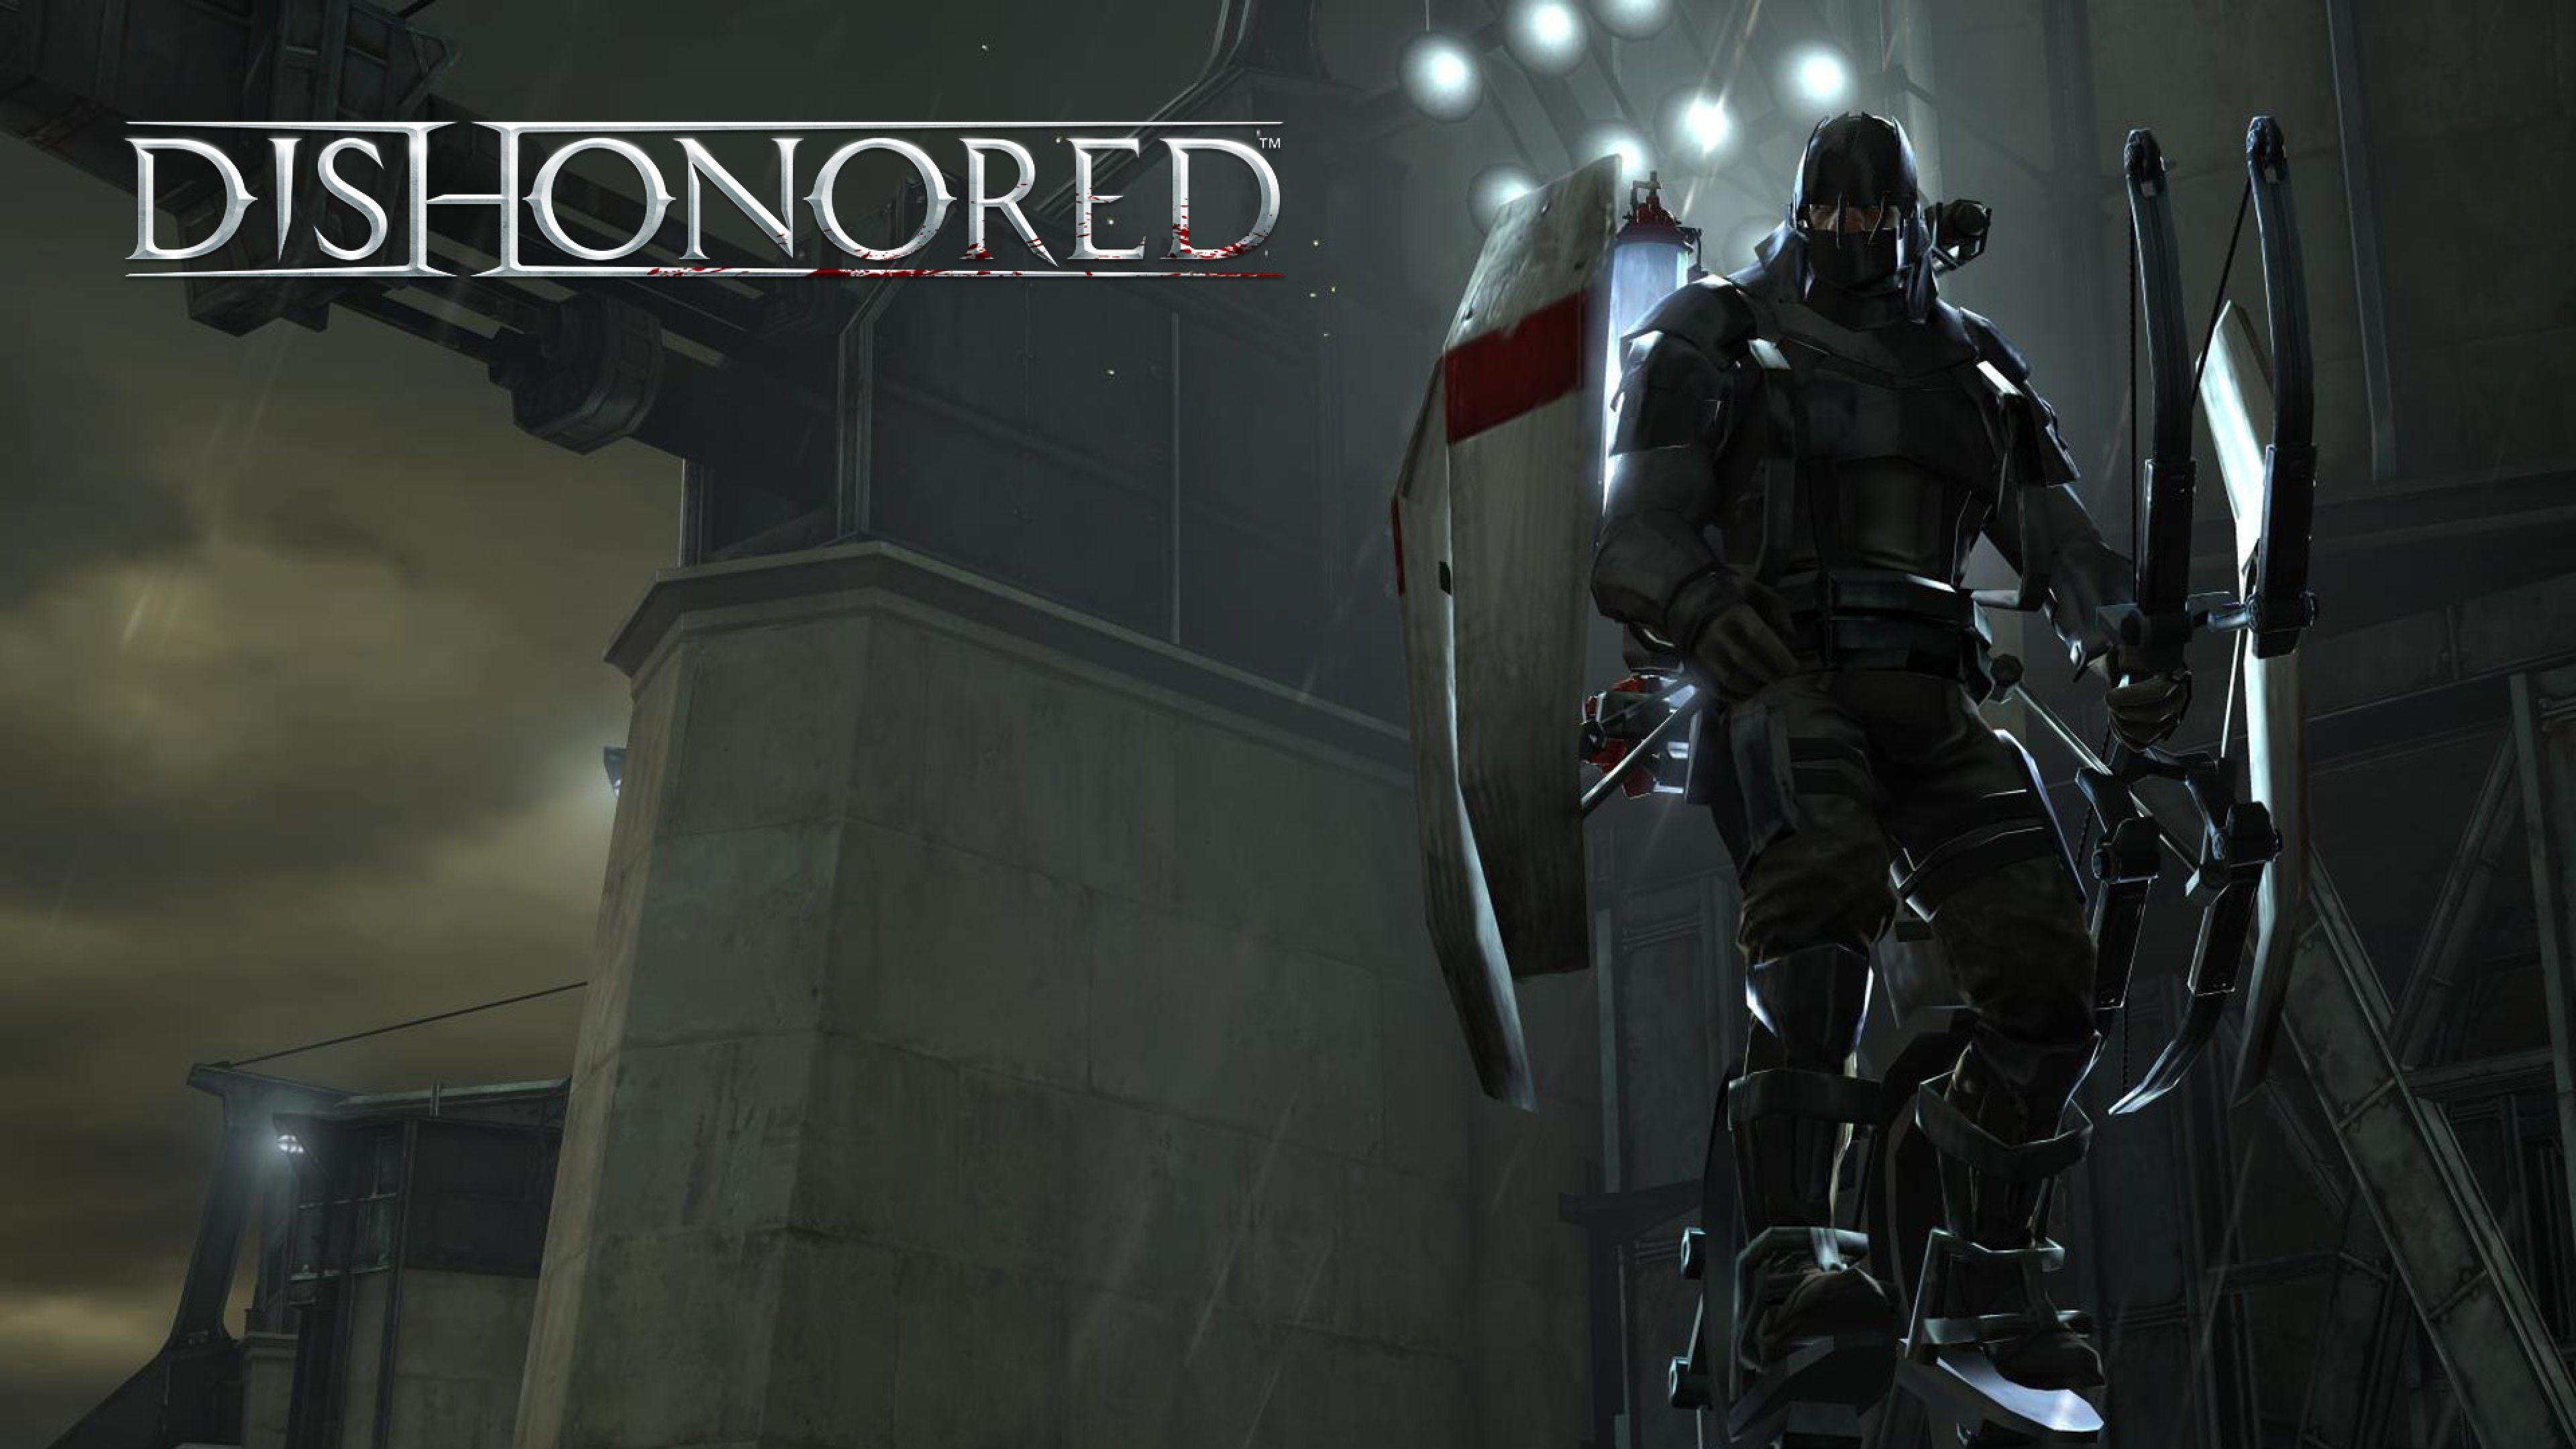 Download Dishonored 2 Games HD 4k Wallpaper In 1366x768 Screen